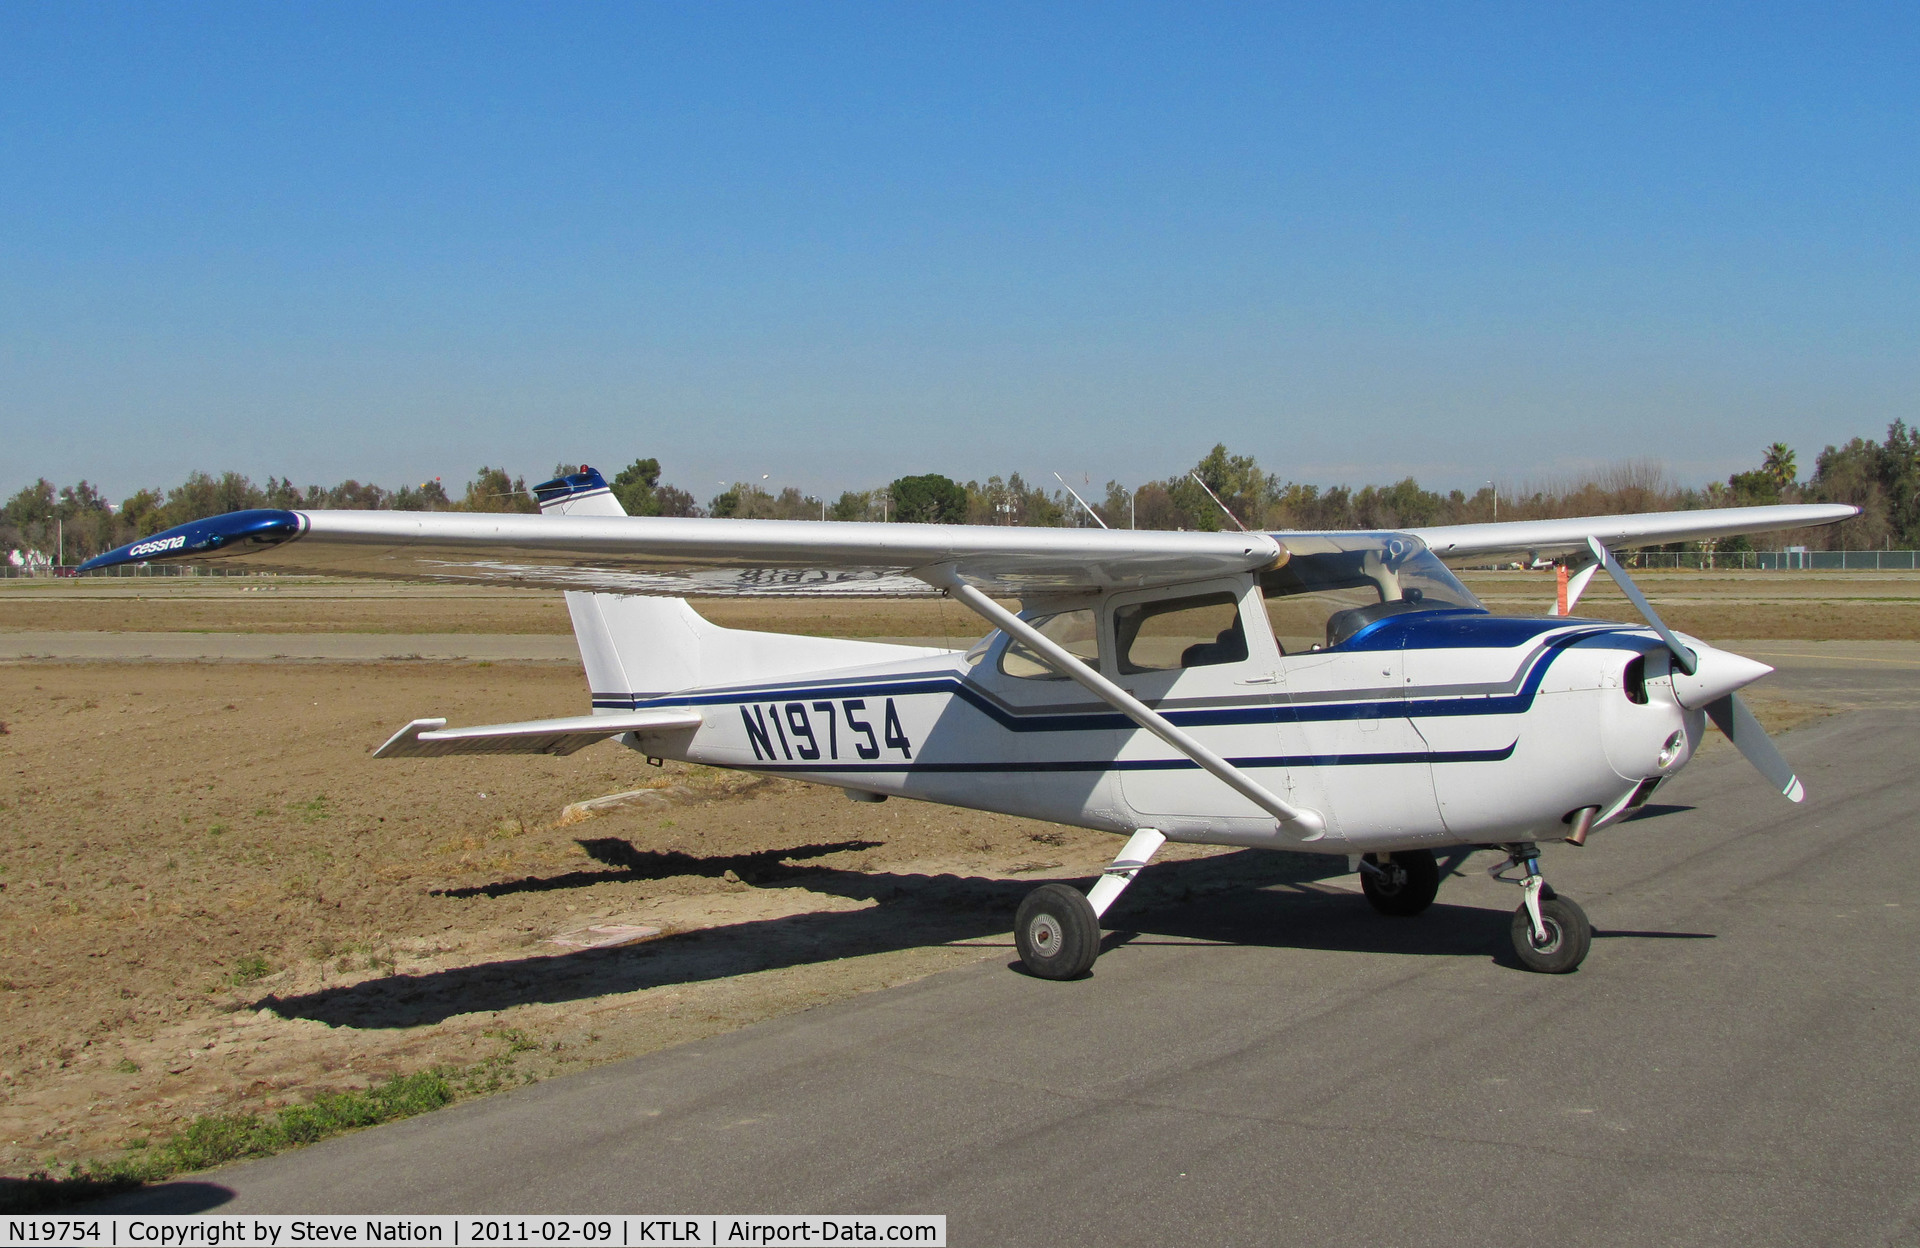 N19754, 1972 Cessna 172L C/N 17260724, Definitely not a 1941 Cessna 172L (!) but a 172L nonetheless visiting @ Tulare, CA